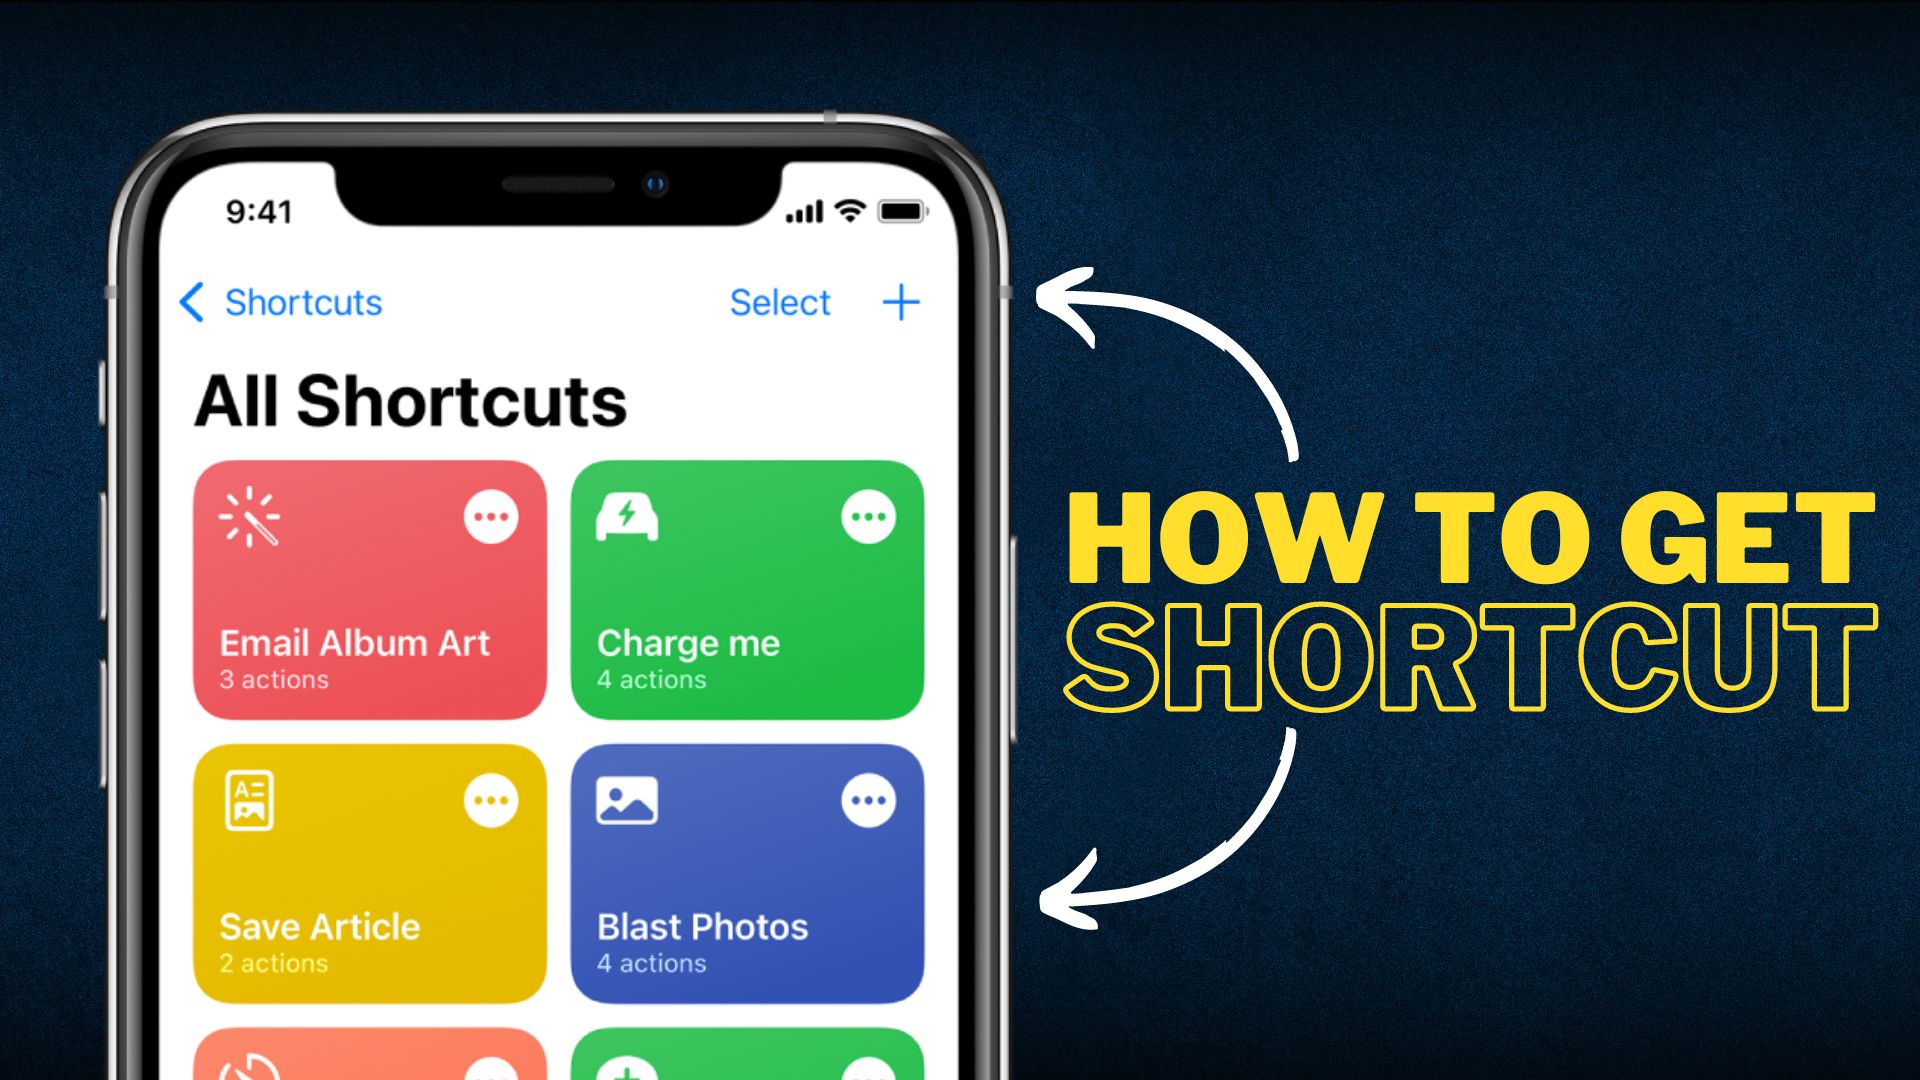 How to get shortcut